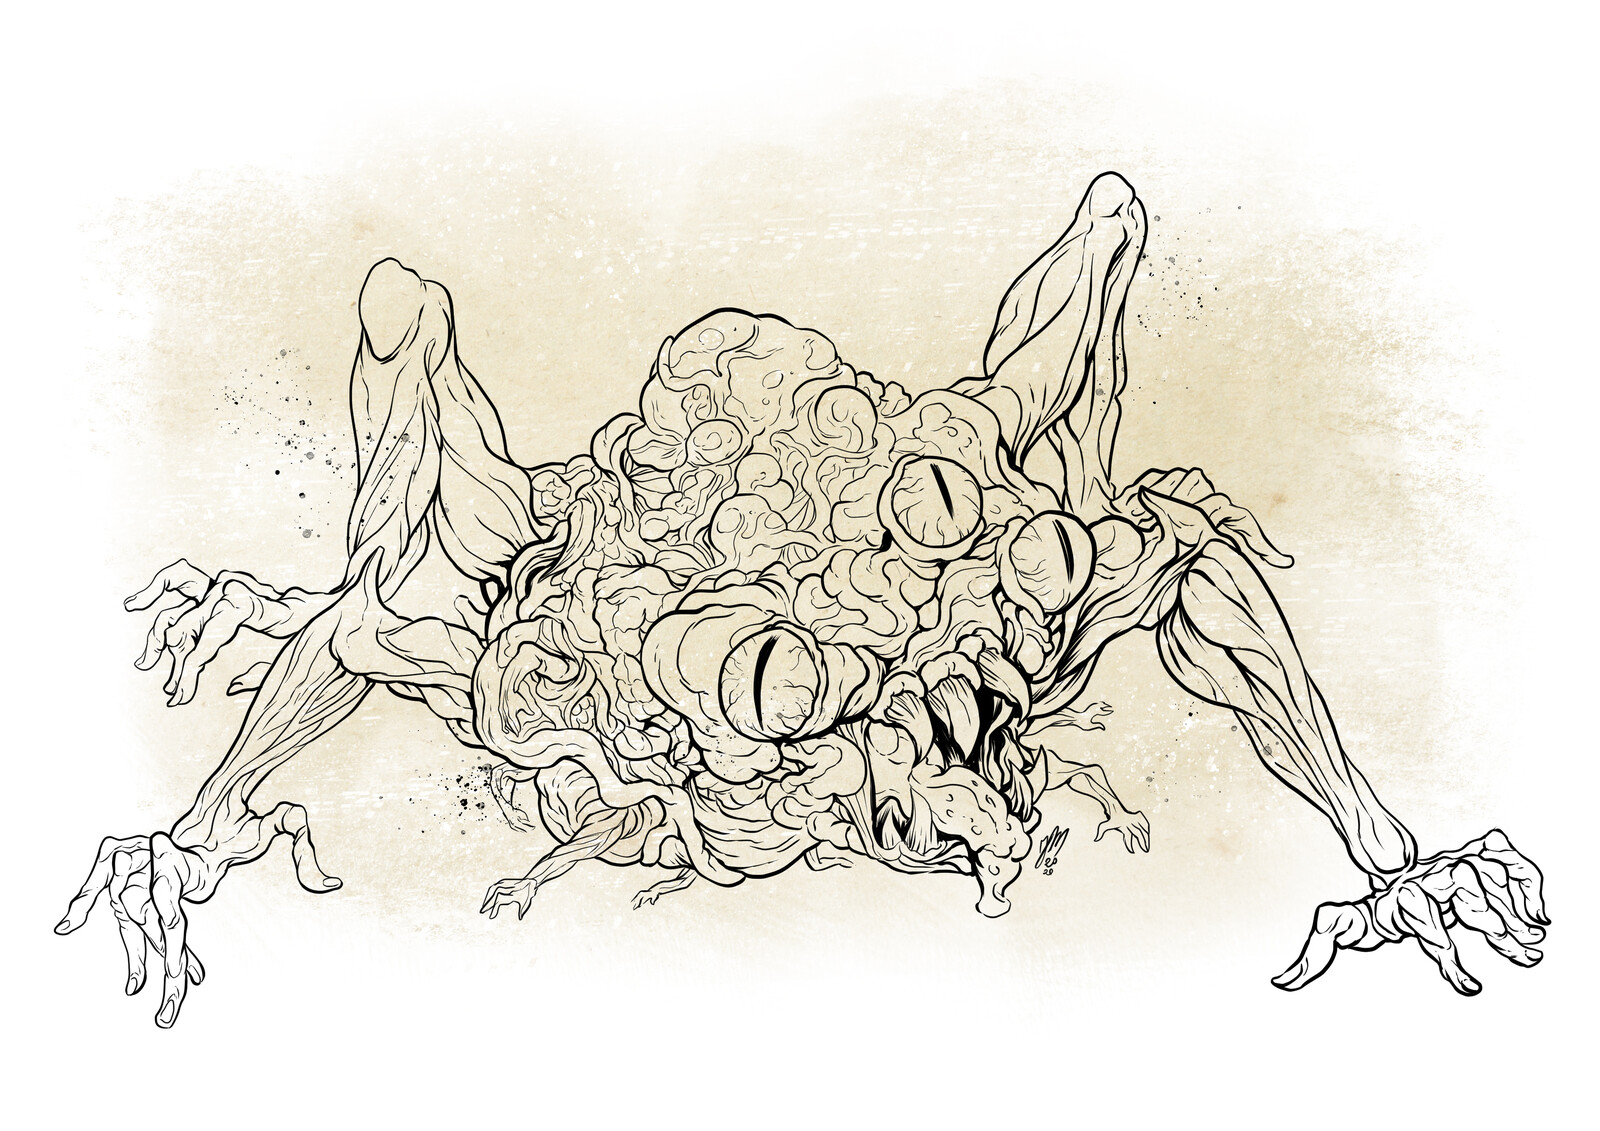 Creature Illustration for Andromeda RPG project